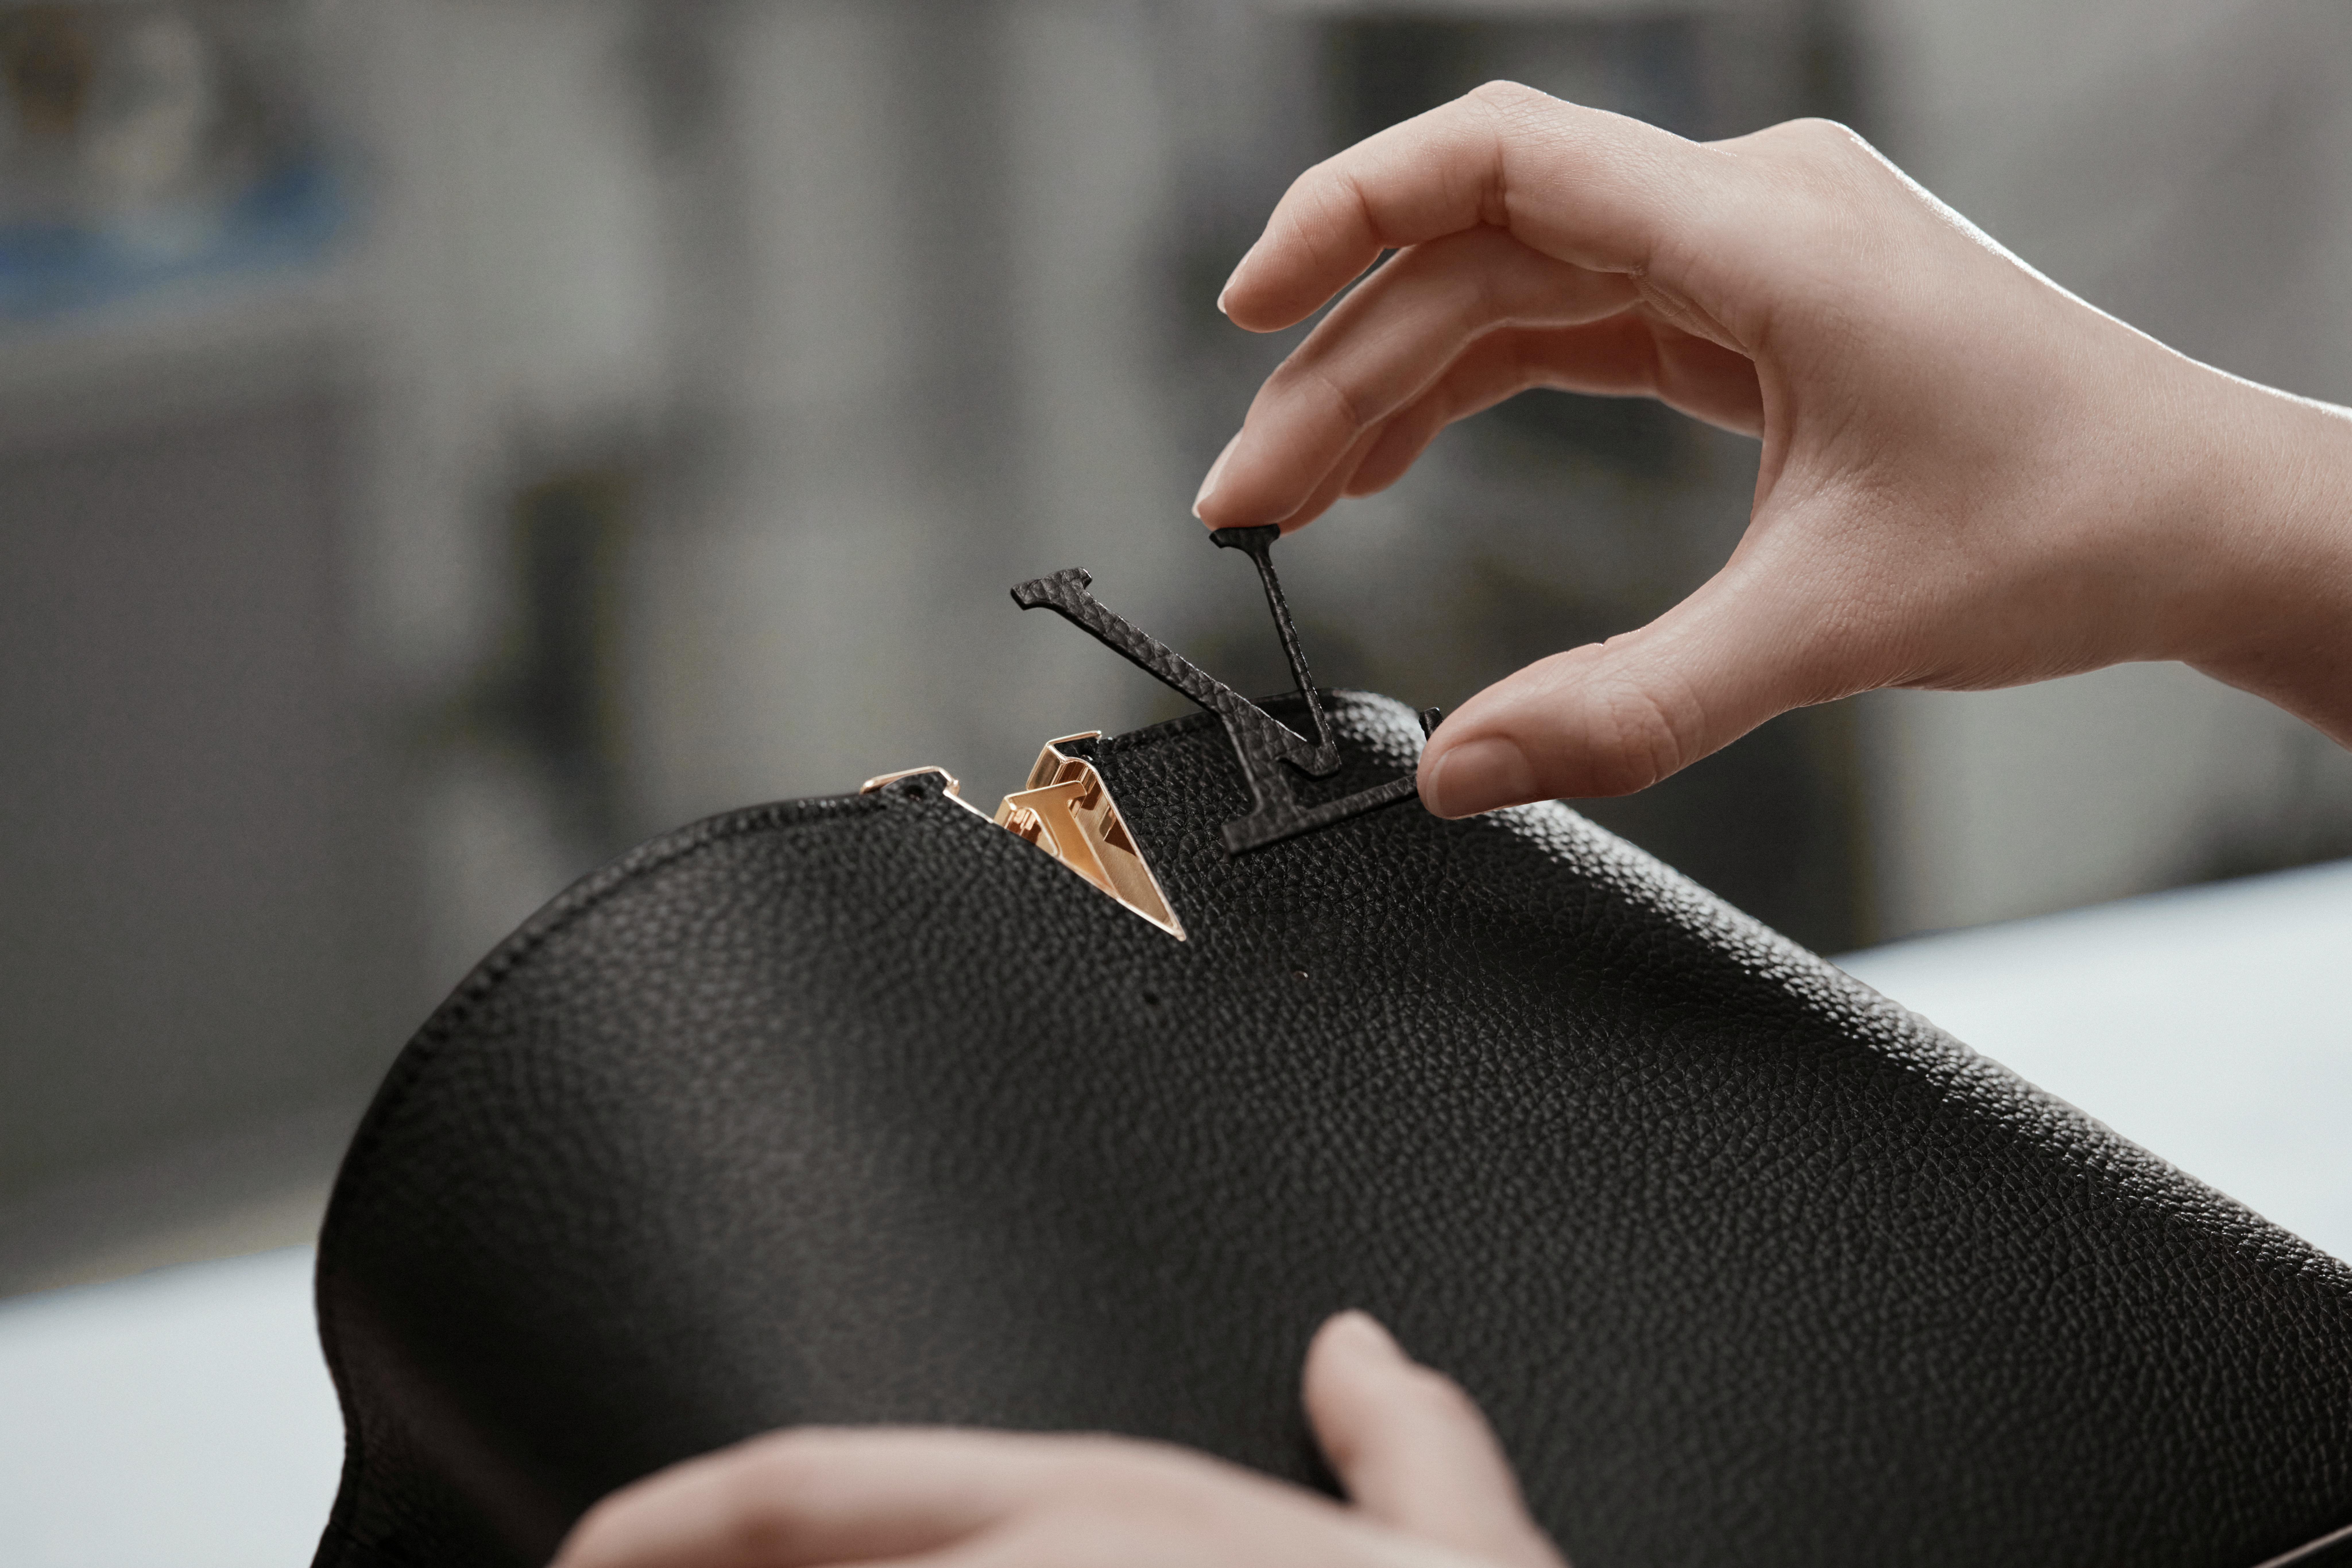 The Devil's in the Details with Louis Vuitton's Signature City Bag